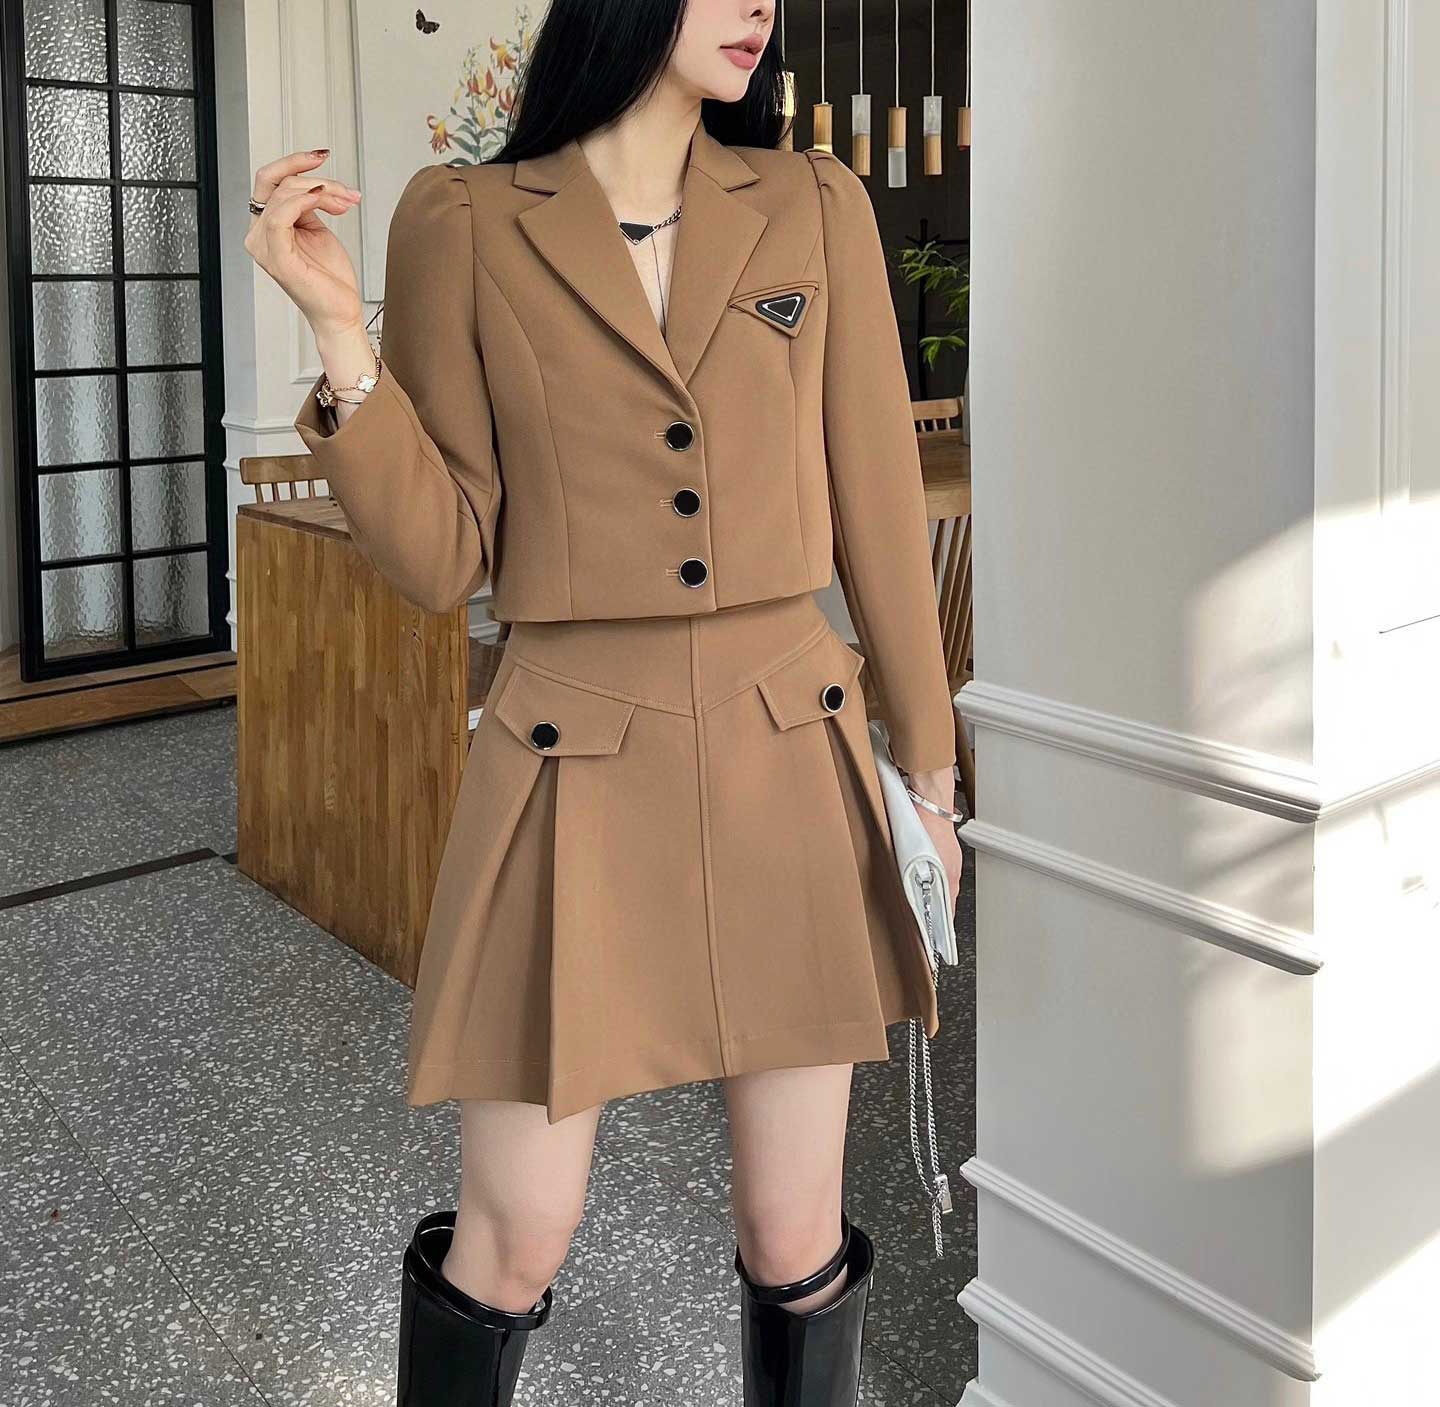 Womens Dress Casual Dresses Blazers Suit 24FW Women Jackets Two Piece Sets Stylist Causal Suits Clothing Stylist Classical Set Long Sleeve S-L